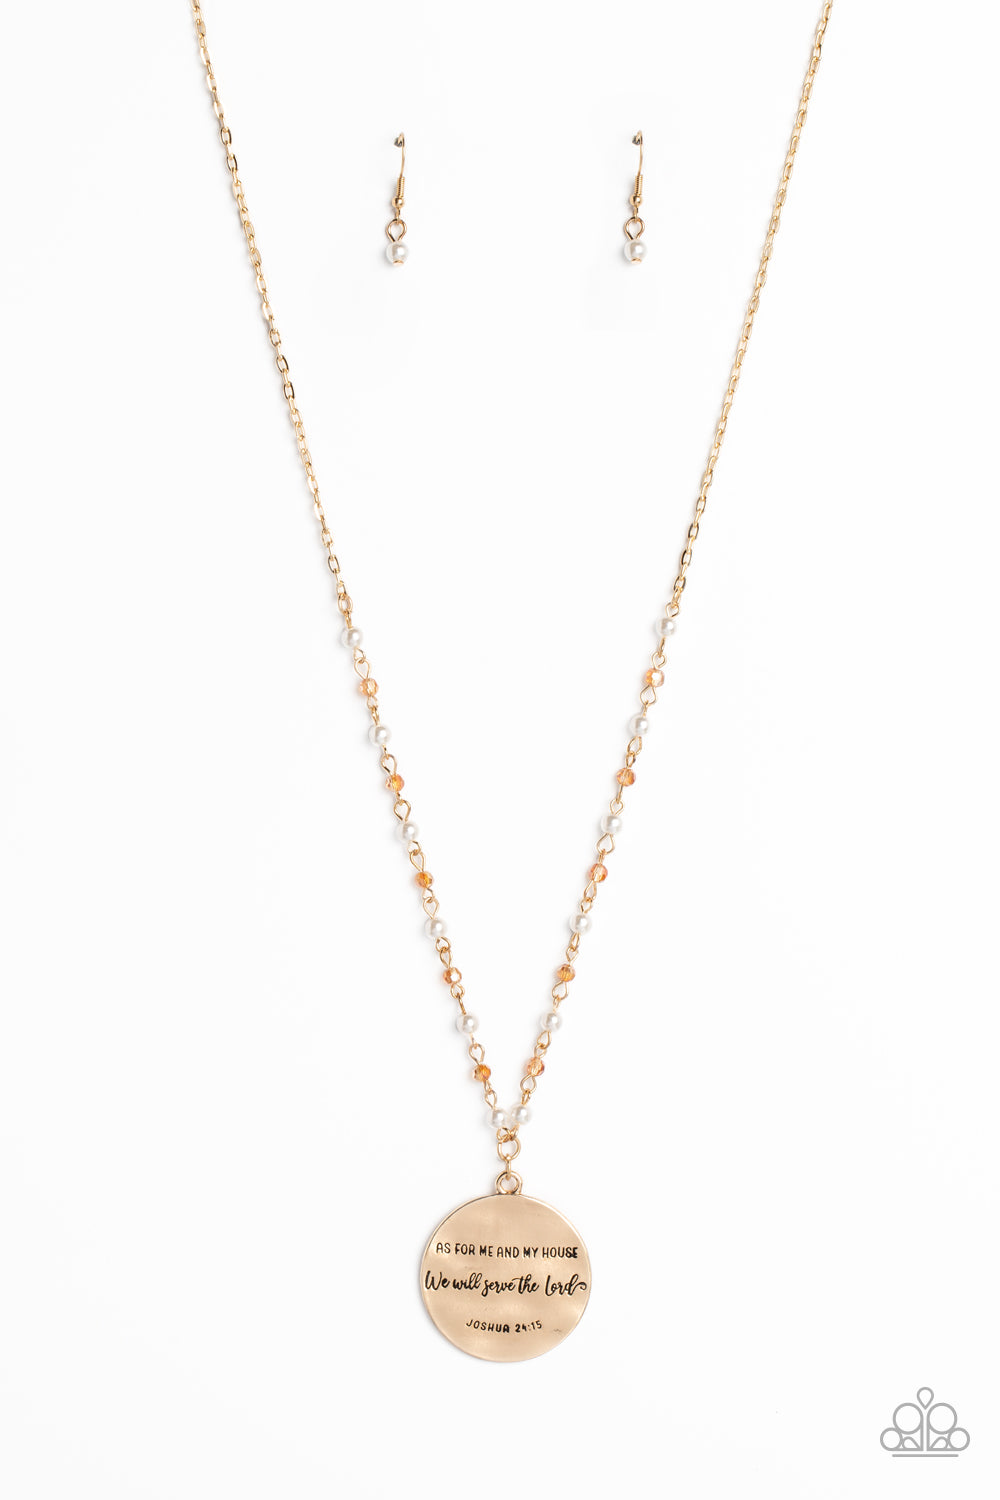 Serving the Lord Necklace (Blue, Gold)